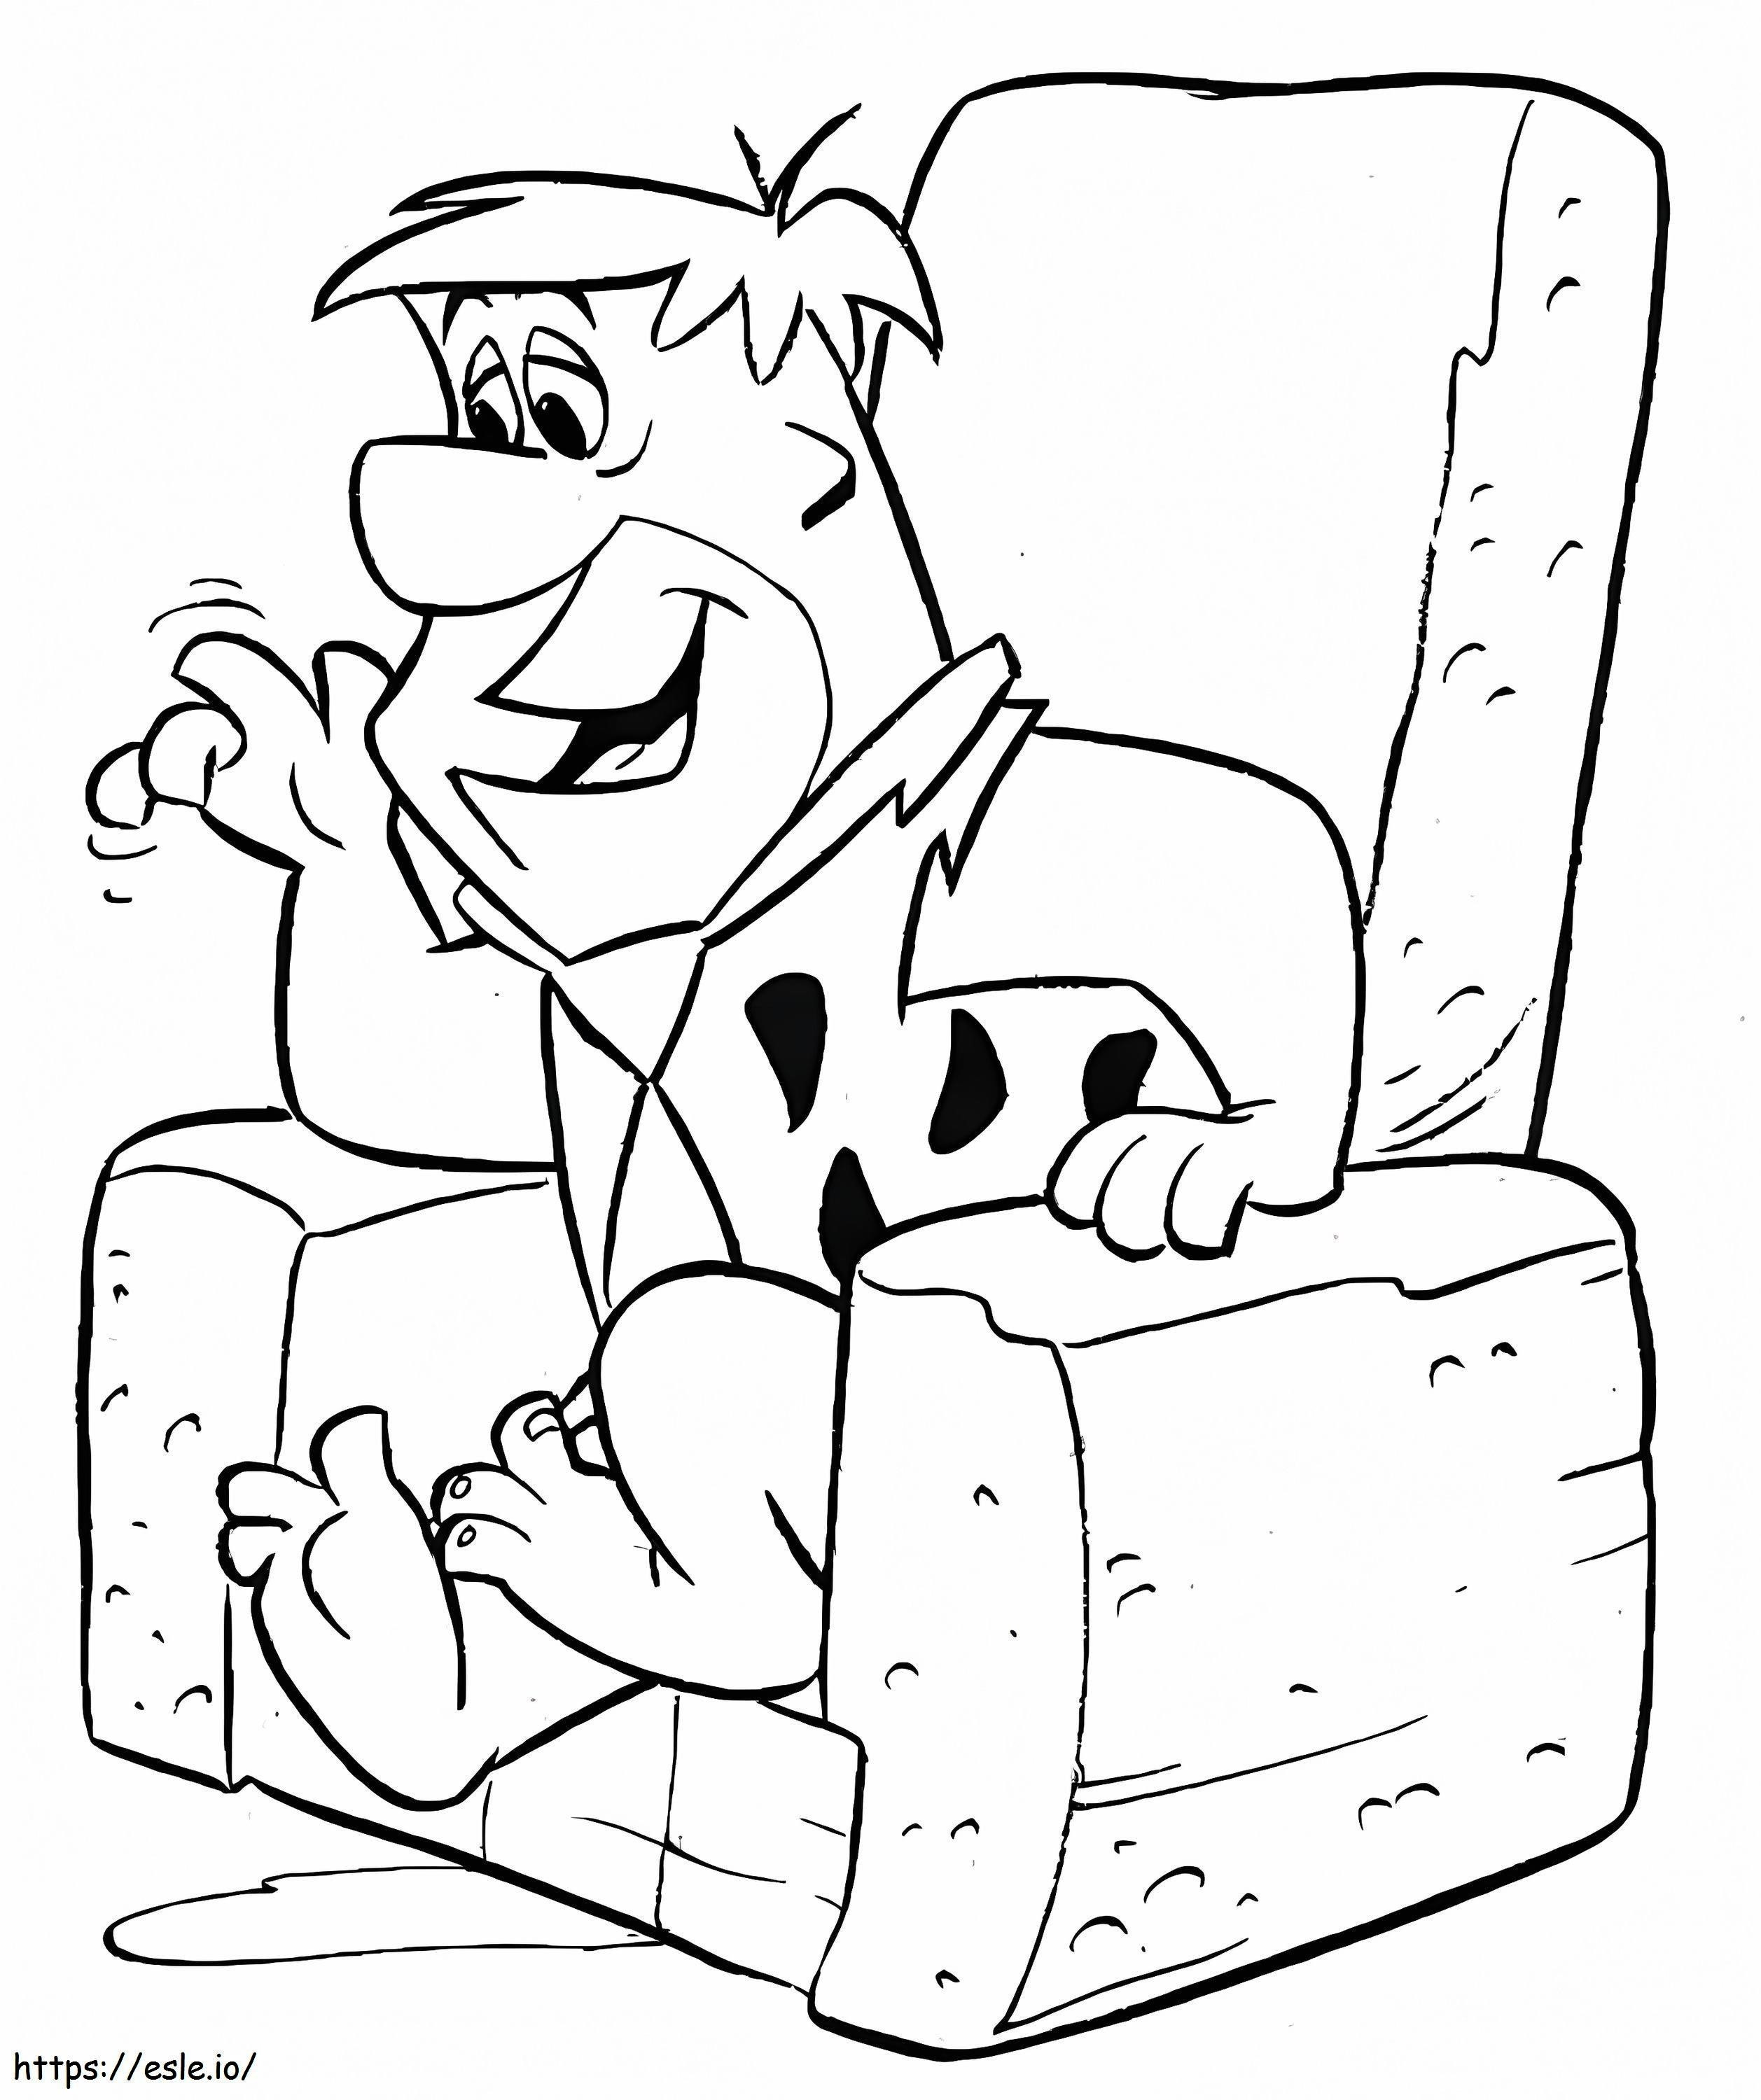 Fred Flintstone Sitting In A Chair coloring page